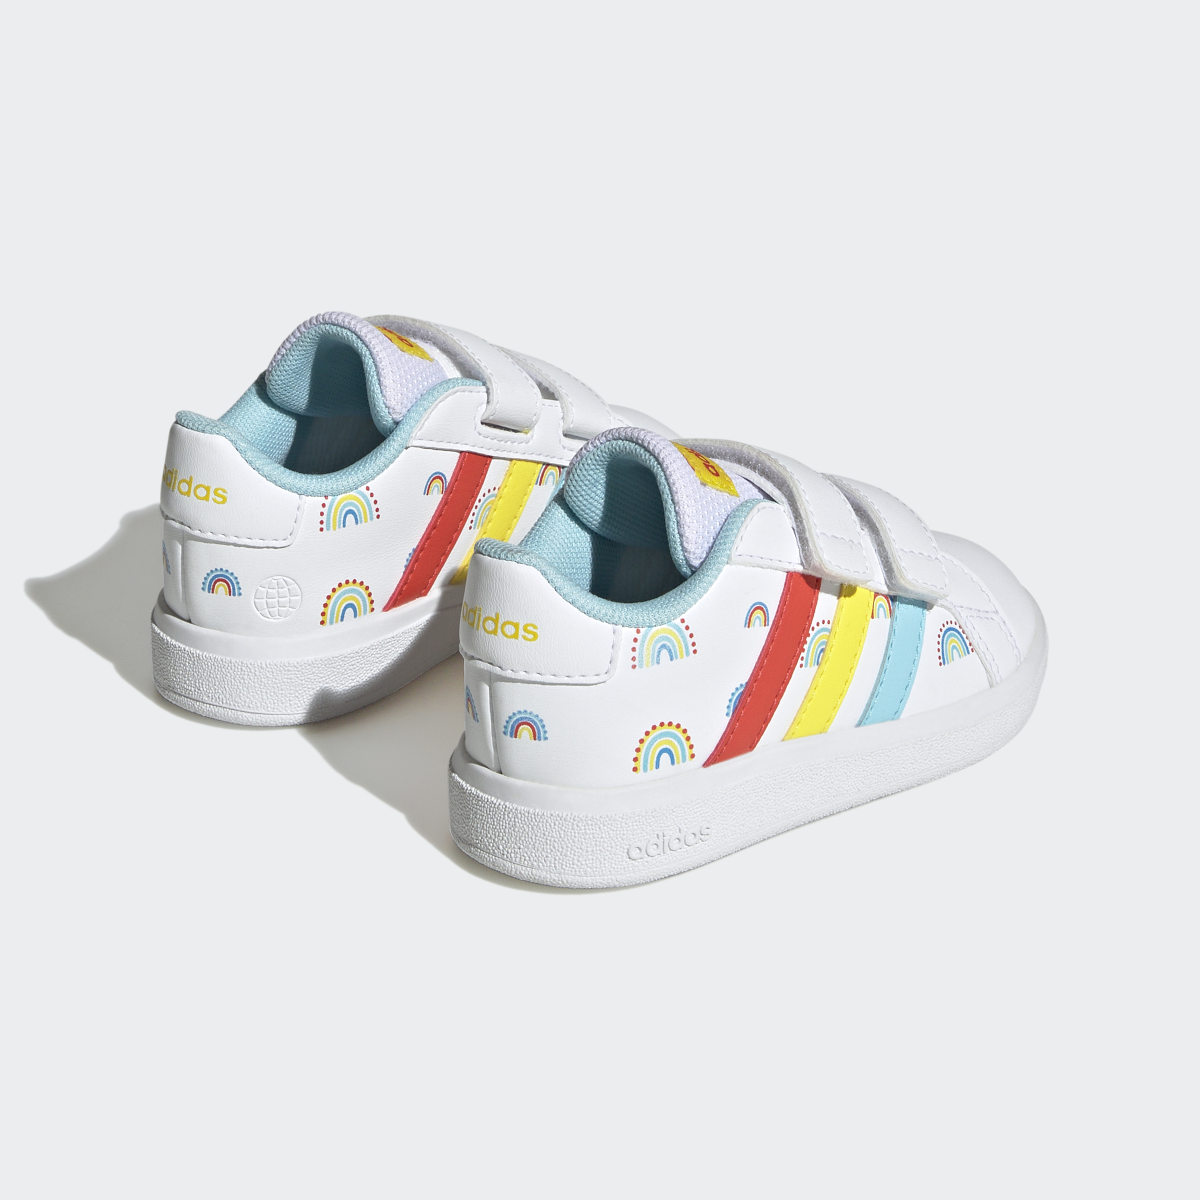 Adidas Grand Court Two-Strap Hook-and-Loop Shoes. 6